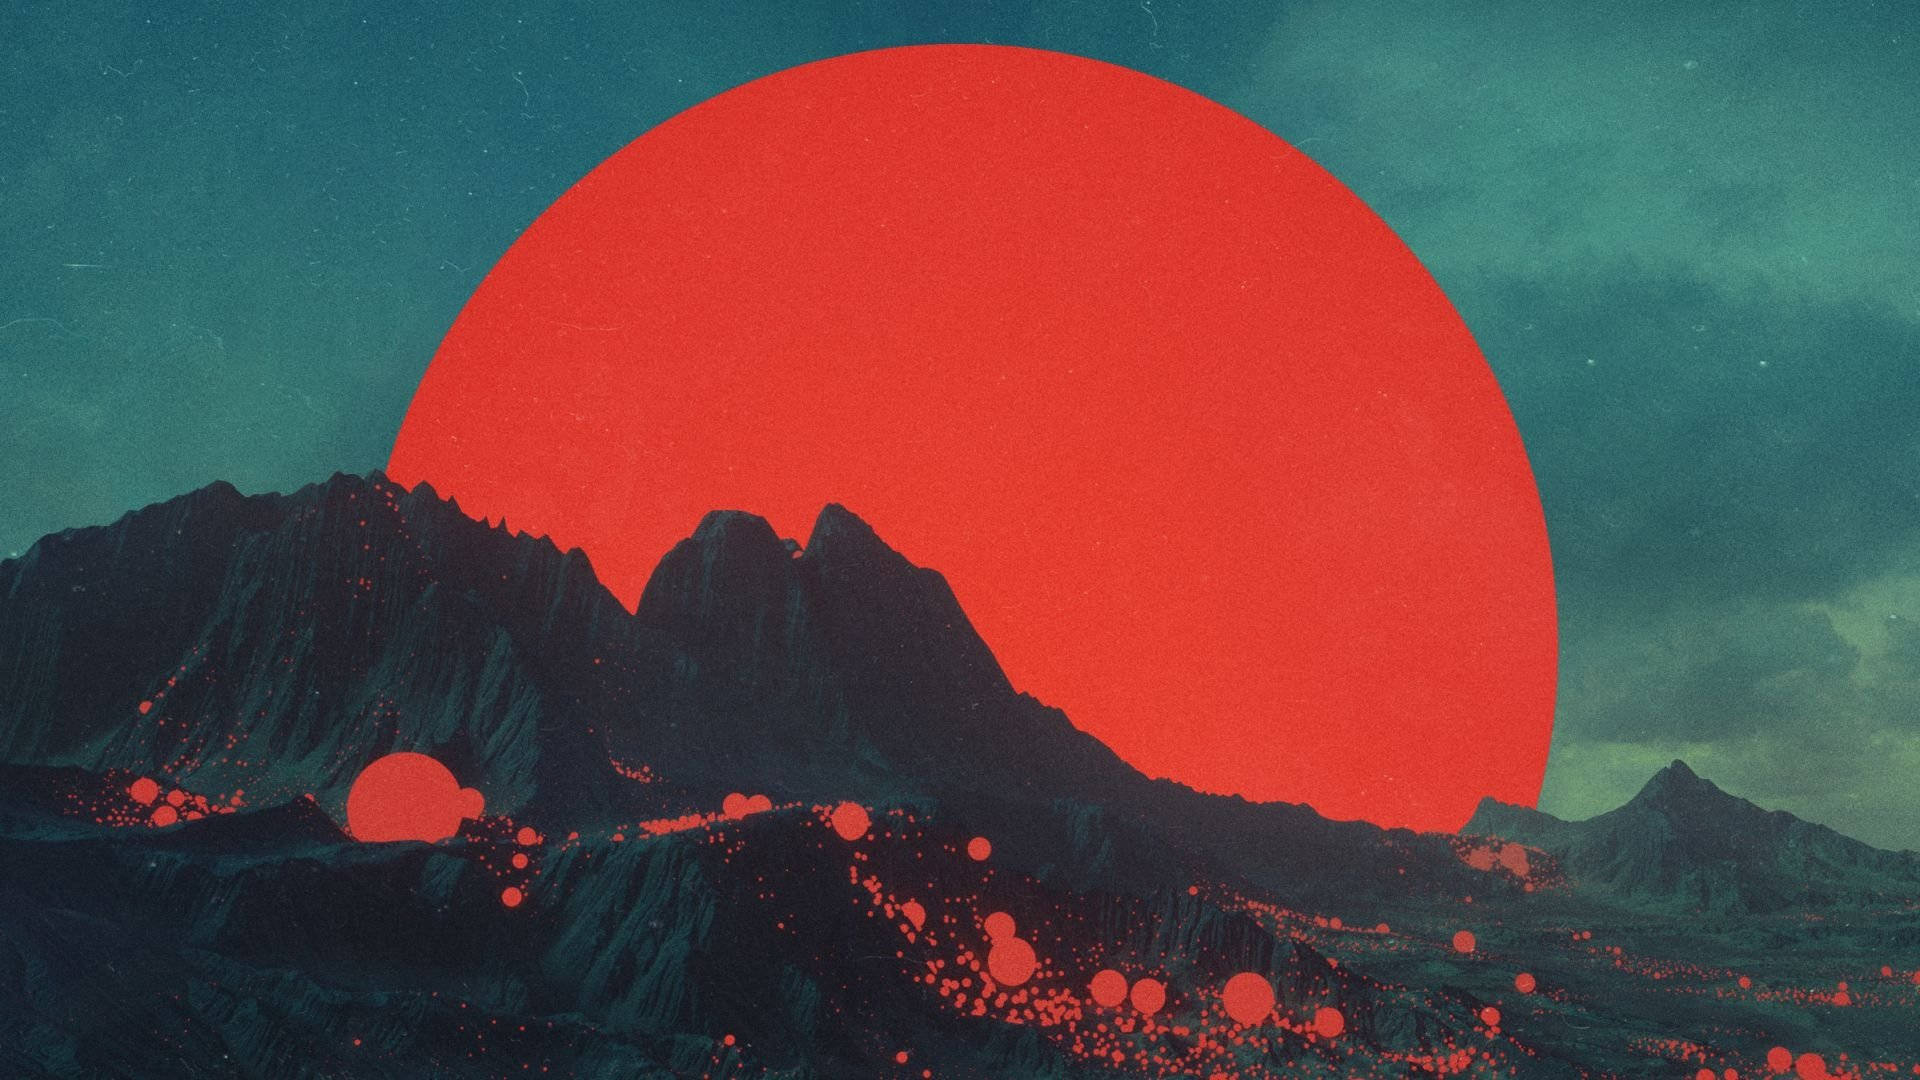 Aesthetic Art Red Moon Background